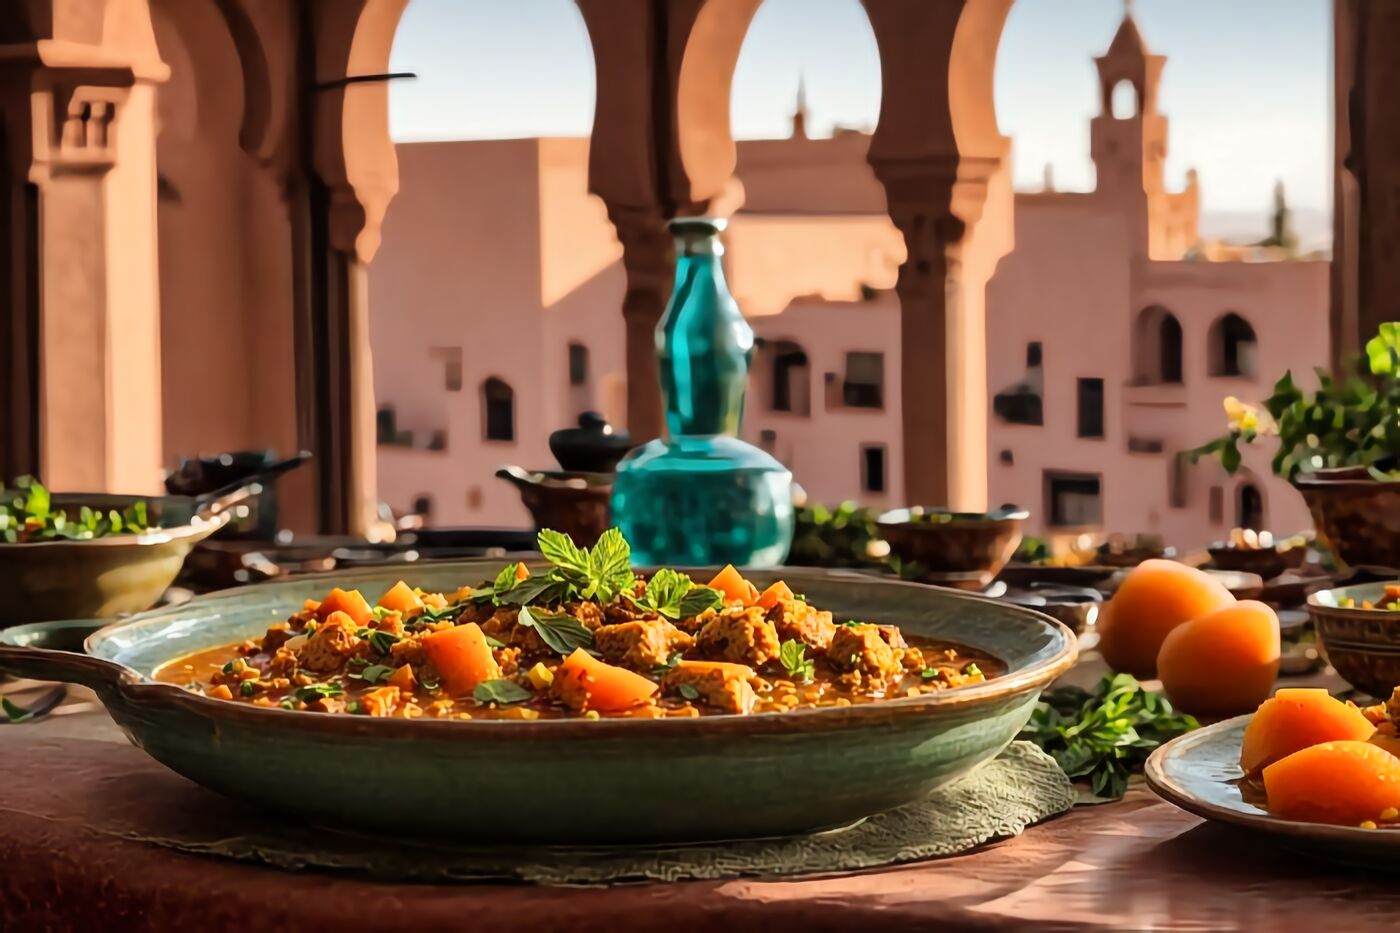 Apricot Chicken Tagine with Ginger & Mint